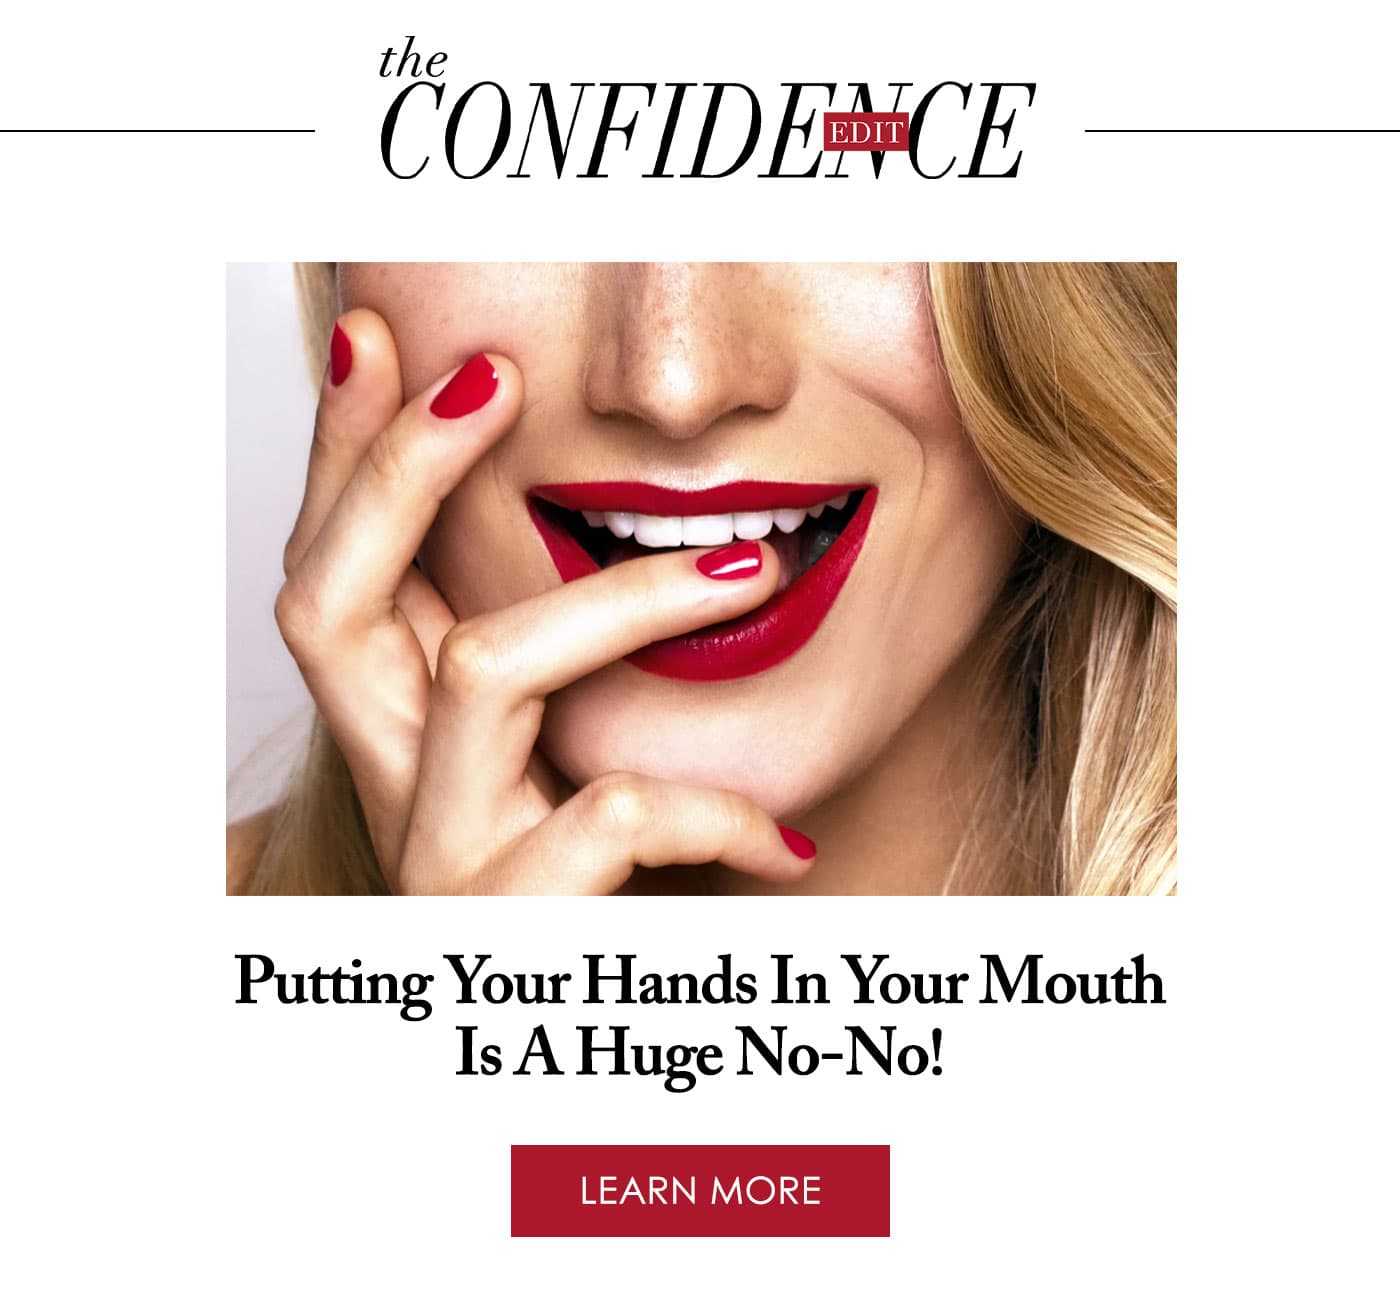 Putting Your Hands In Your Mouth Is A Huge No-No